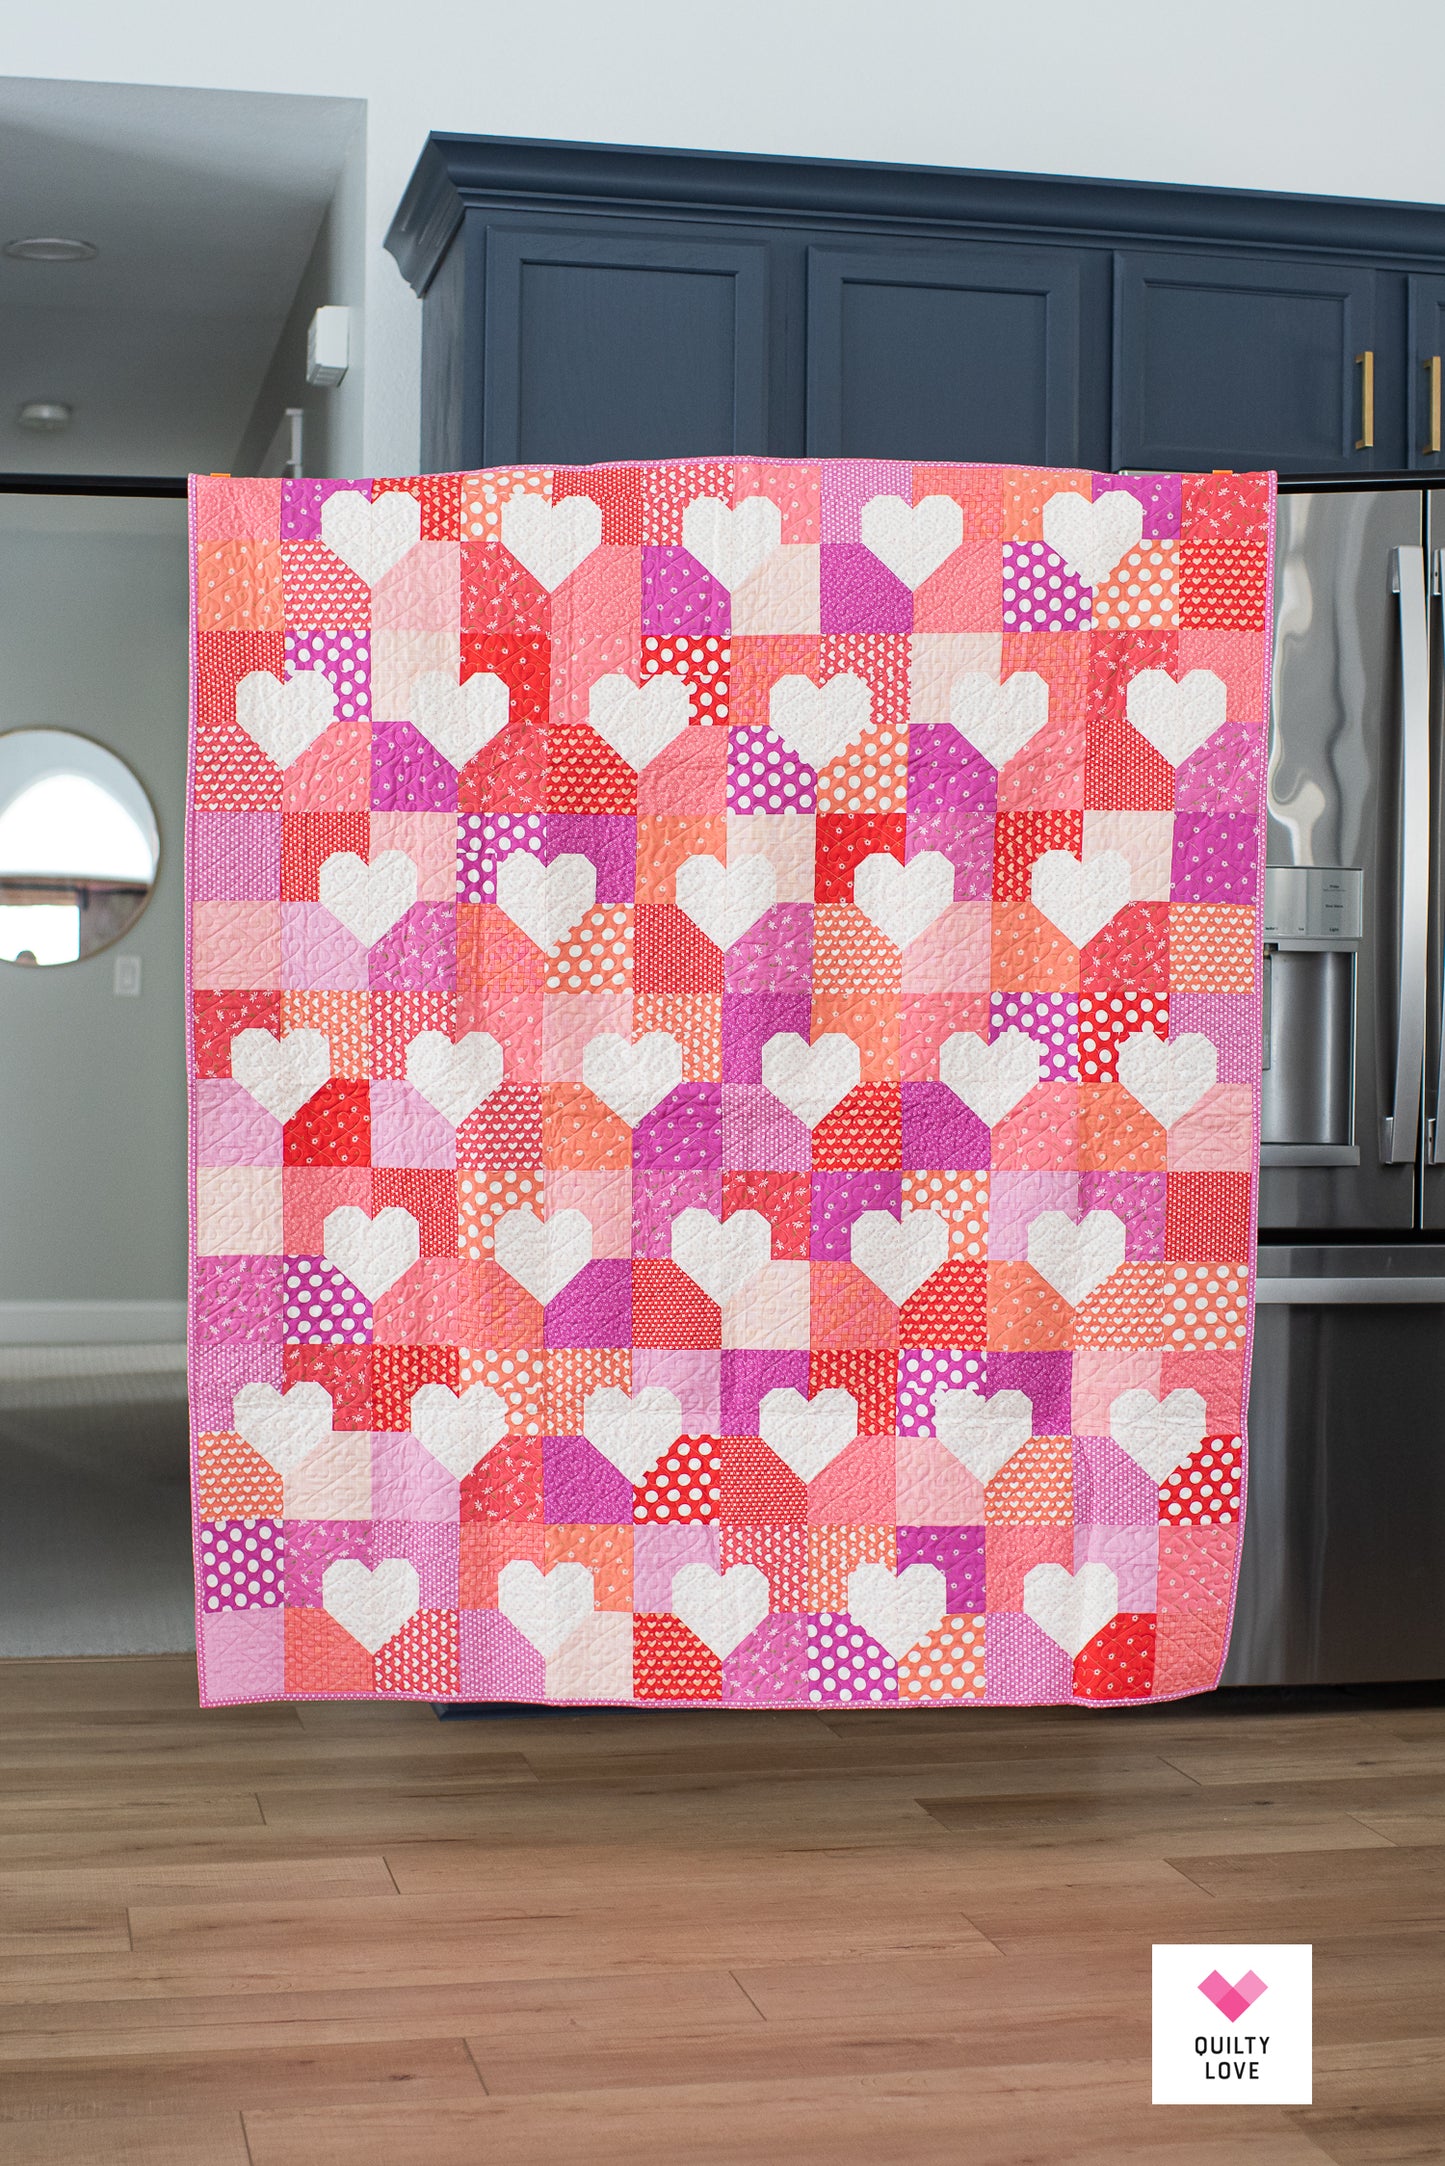 Patchwork Hearts Quilt - The Sincerely Yours One